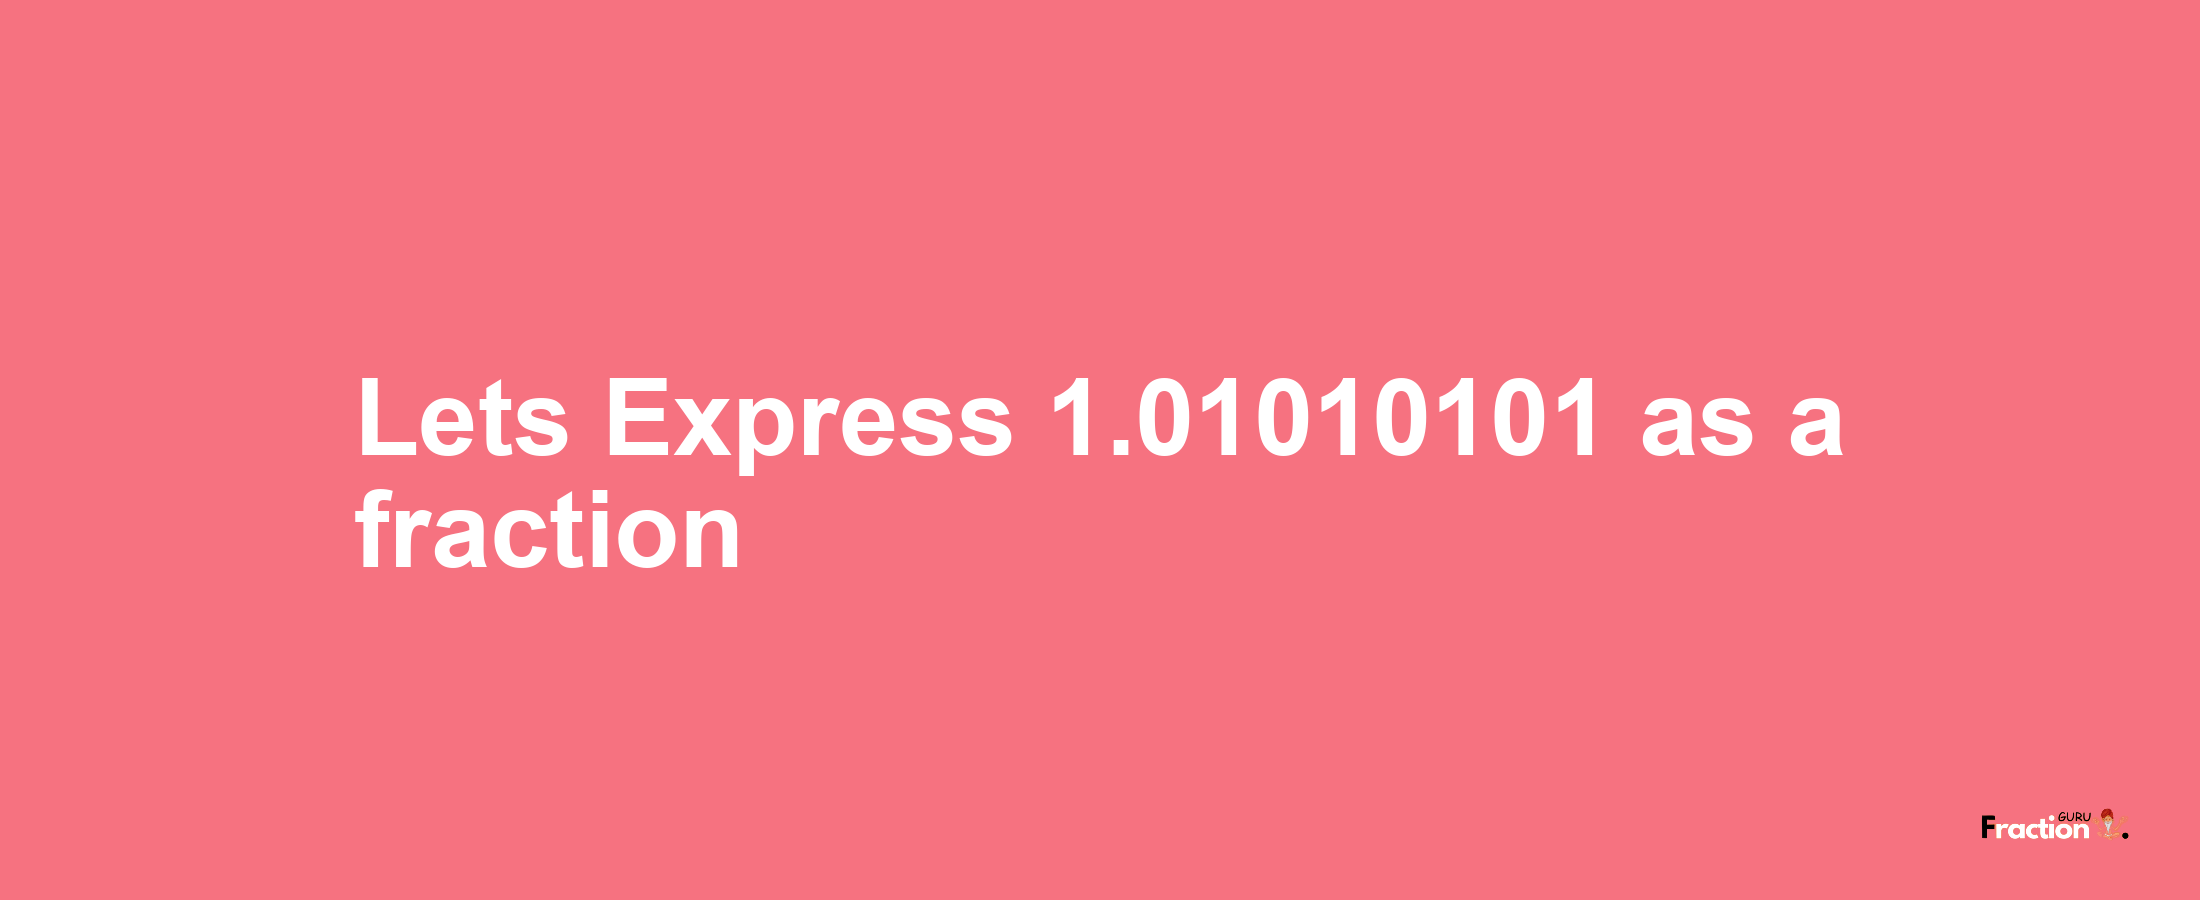 Lets Express 1.01010101 as afraction